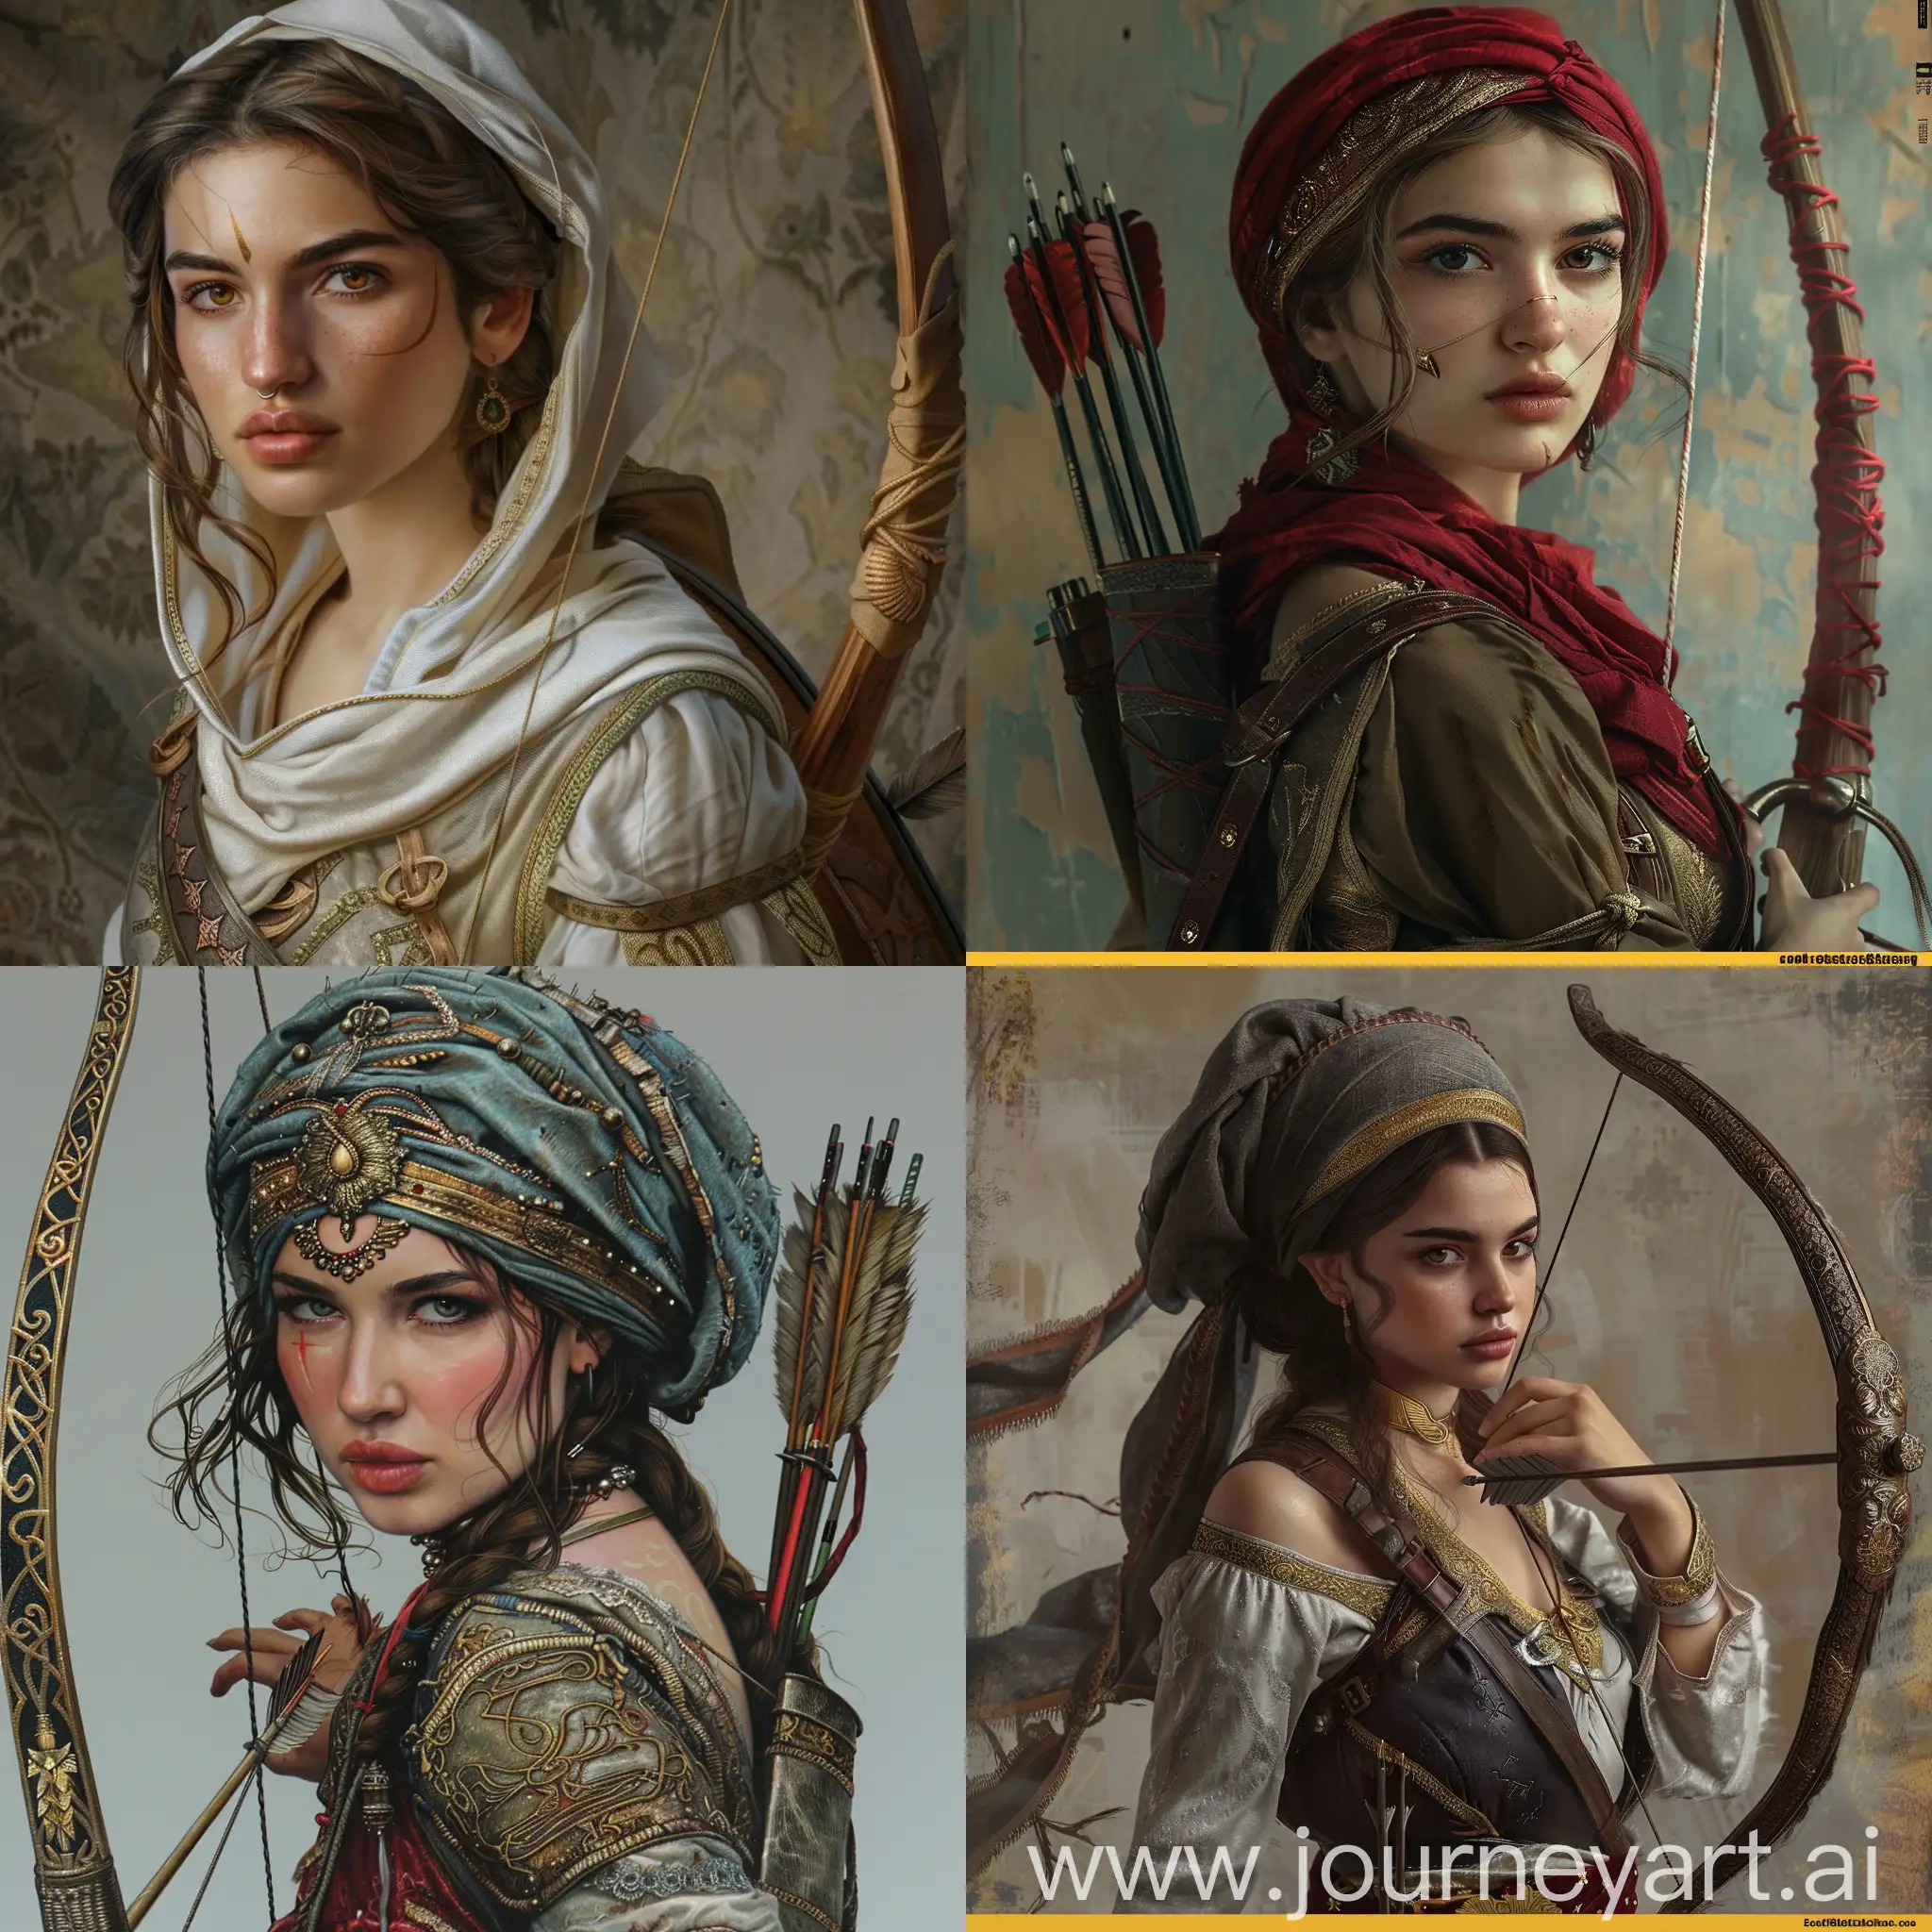 Medieval-Turkish-Warrior-with-Bow-Ultra-Realistic-Portrait-of-a-Sterneyed-Beauty-Girl